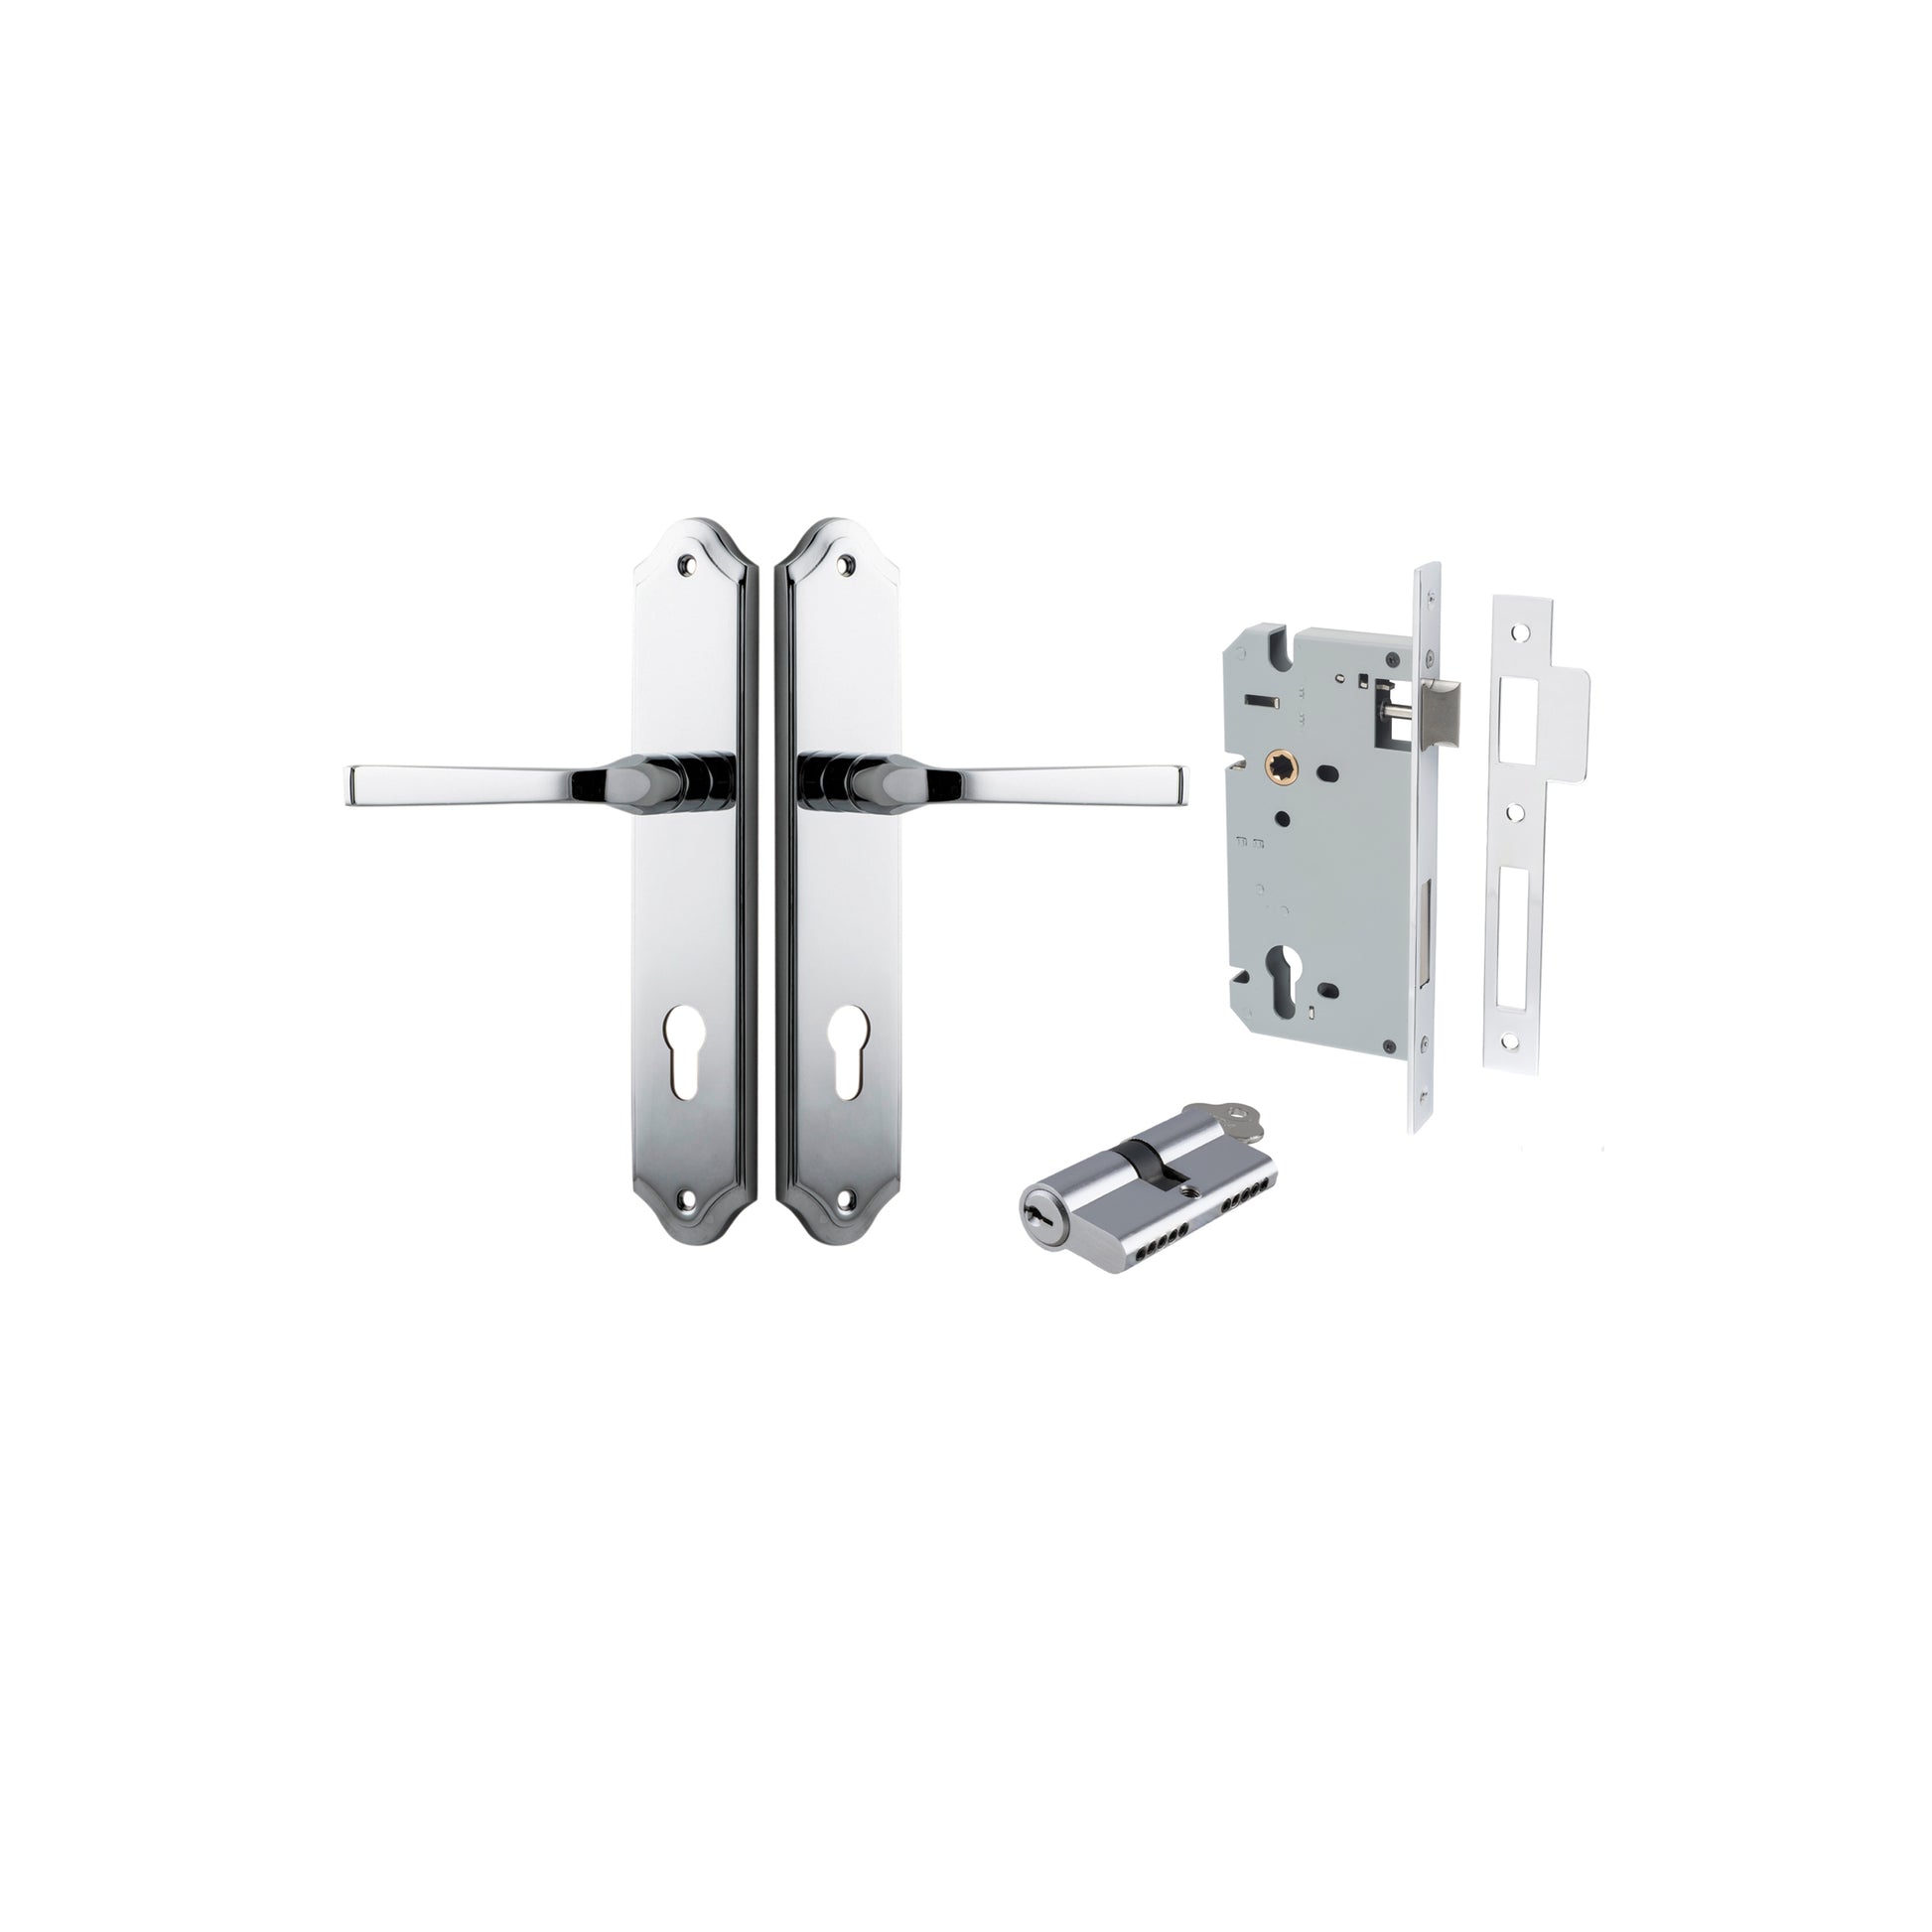 Door Lever Annecy Shouldered Euro Polished Chrome CTC85mm H240xW50xP65mm Entrance Kit, Mortice Lock Euro Polished Chrome CTC85mm Backset 60mm, Euro Cylinder Dual Function 5 Pin Polished Chrome L65mm KA1 in Polished Chrome